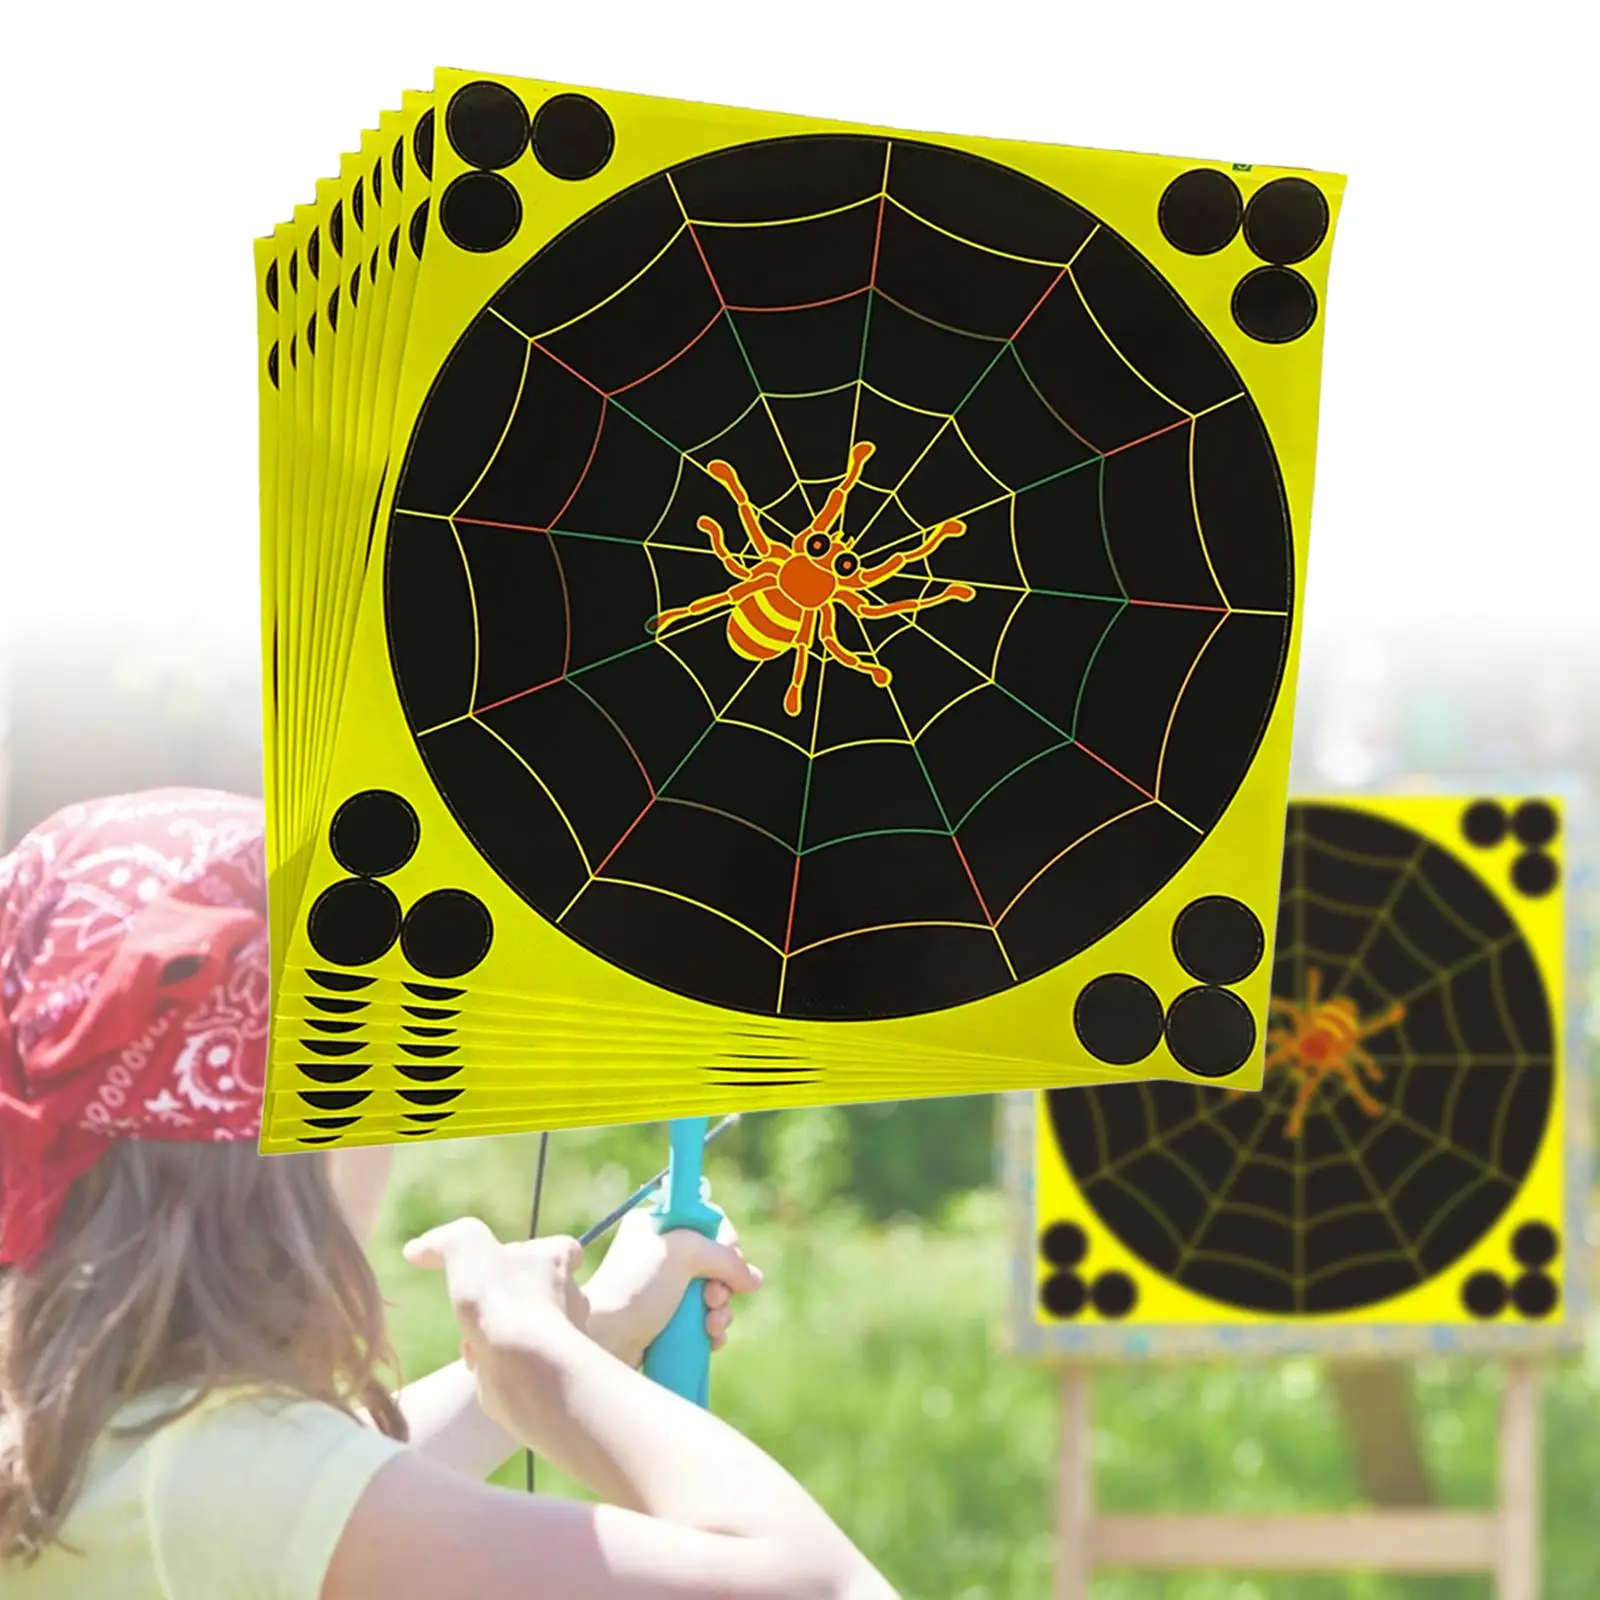  Target Sticker     12 Inch  Target  Strength  Game  Accessories